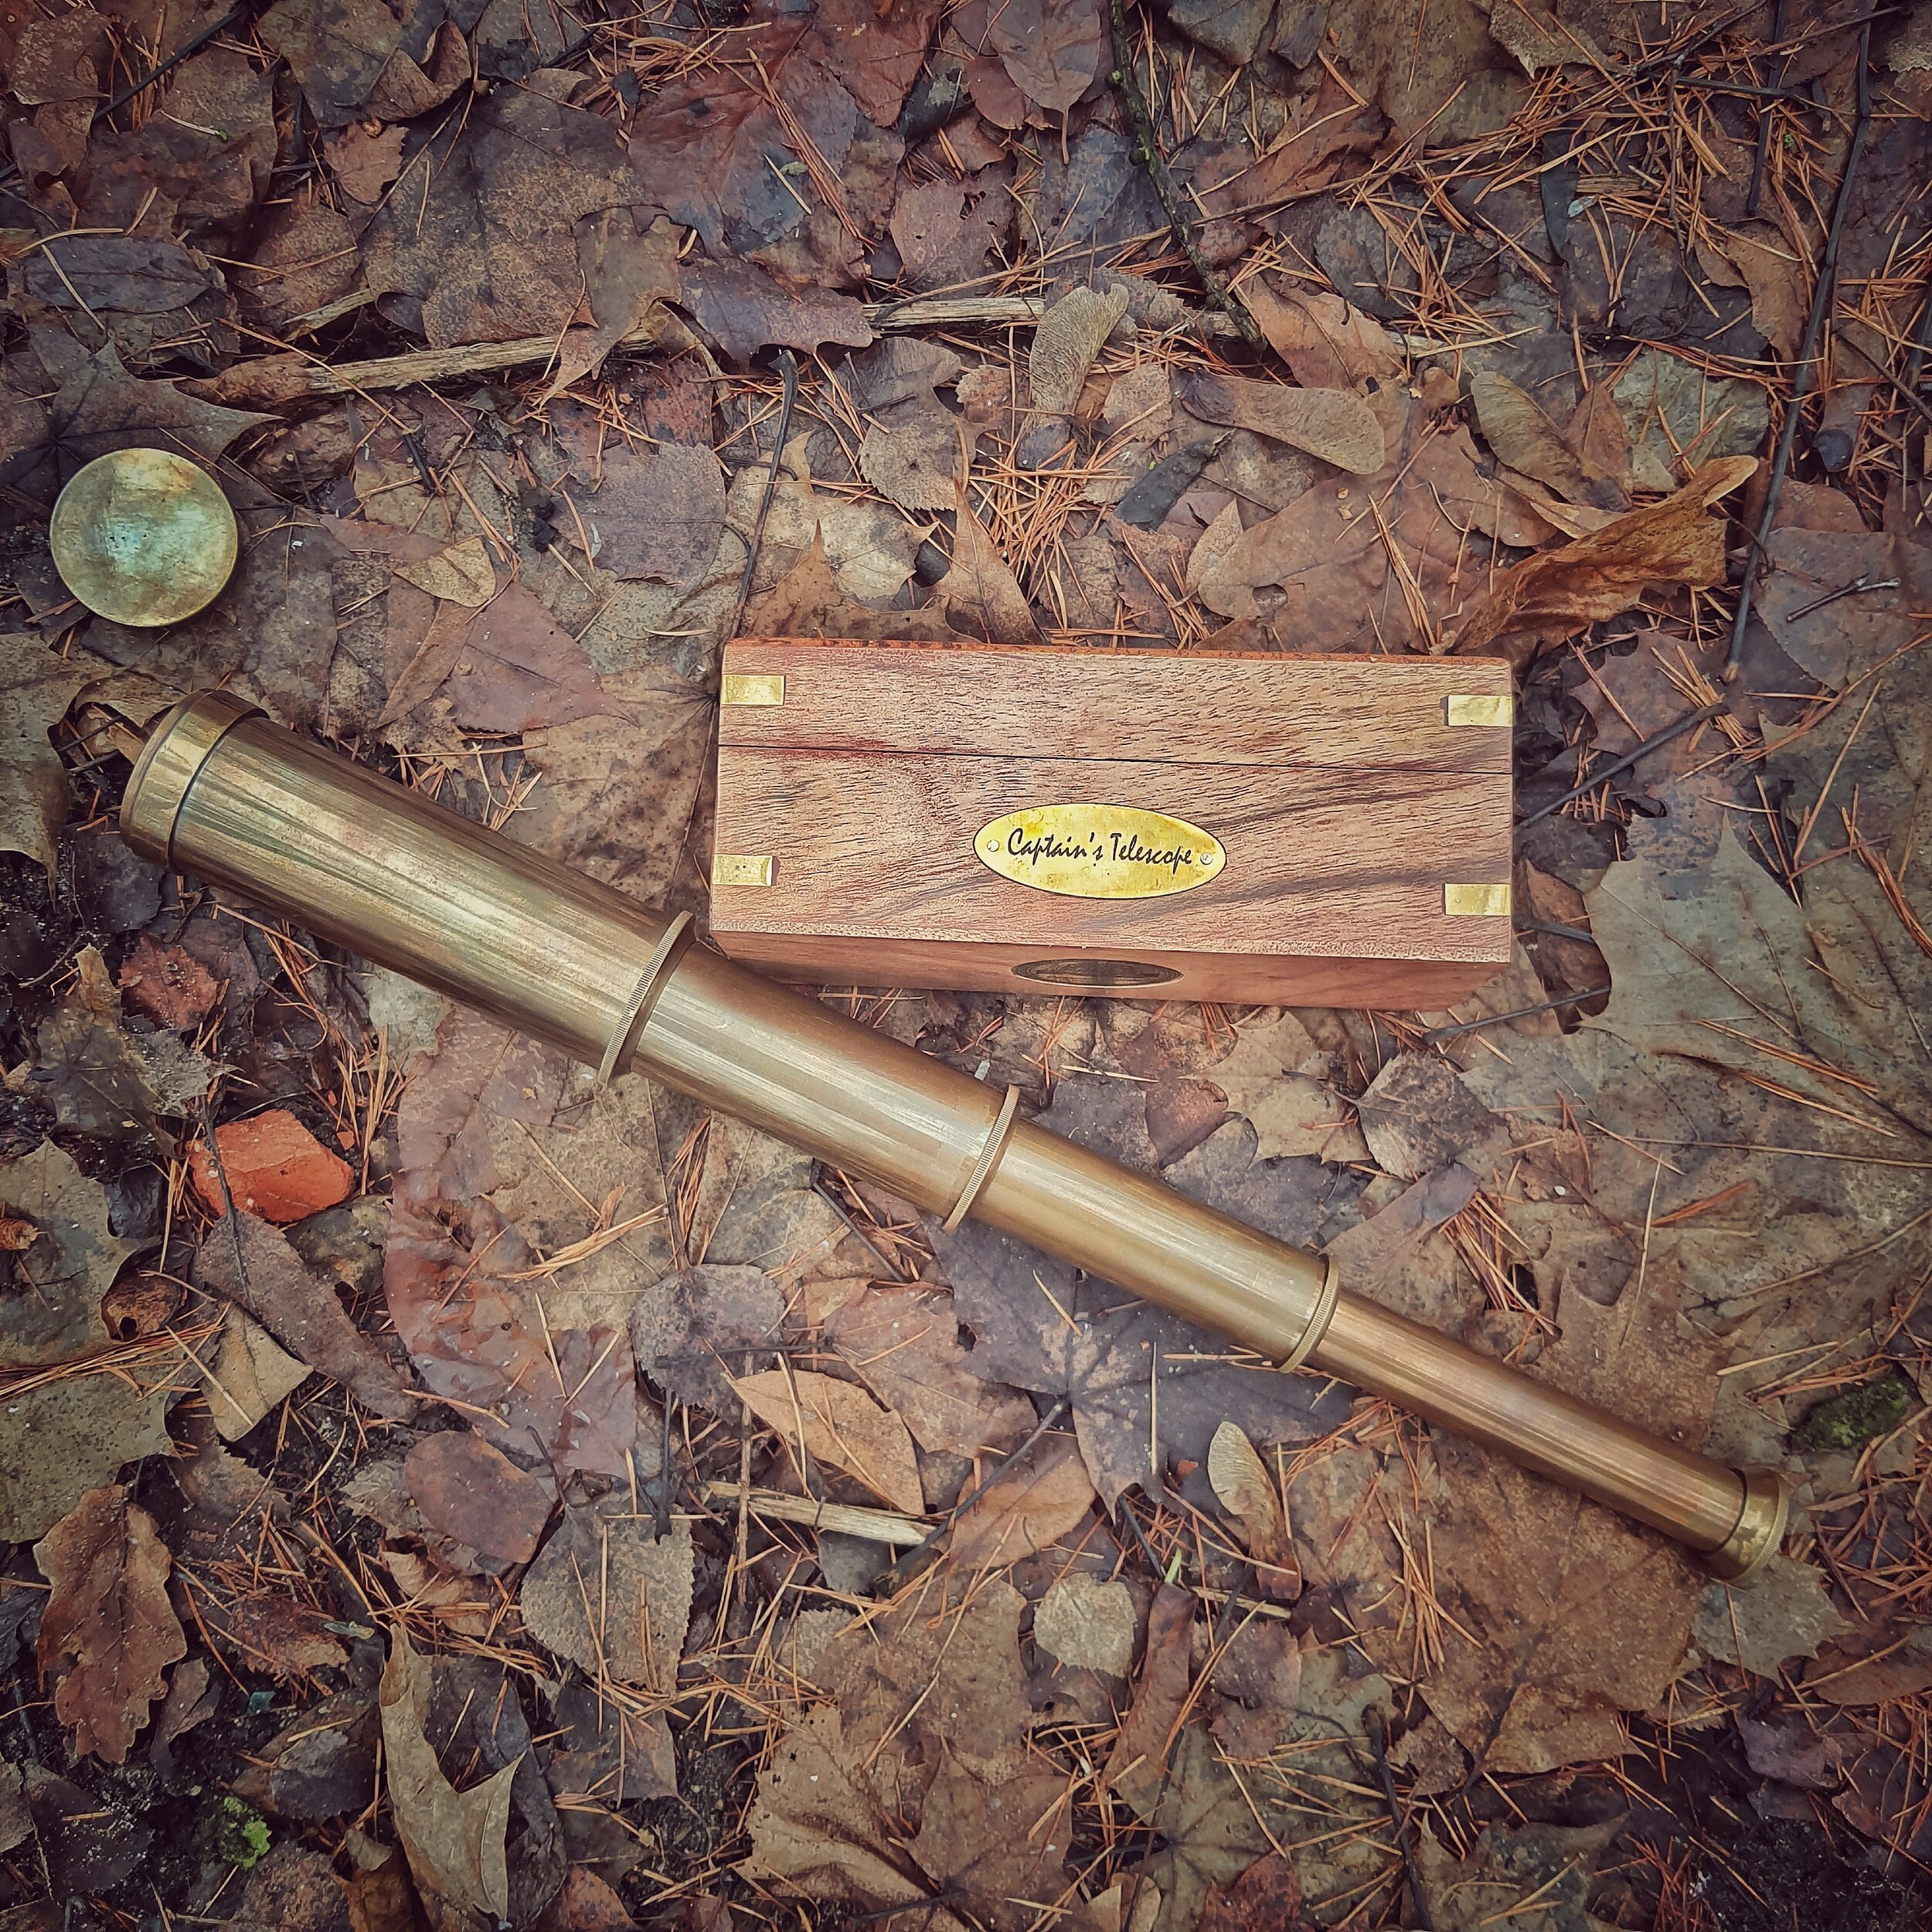 Details about   Solid Brass Nautical Handheld London Telescope w/ Handmade Wooden Box Great Gift 